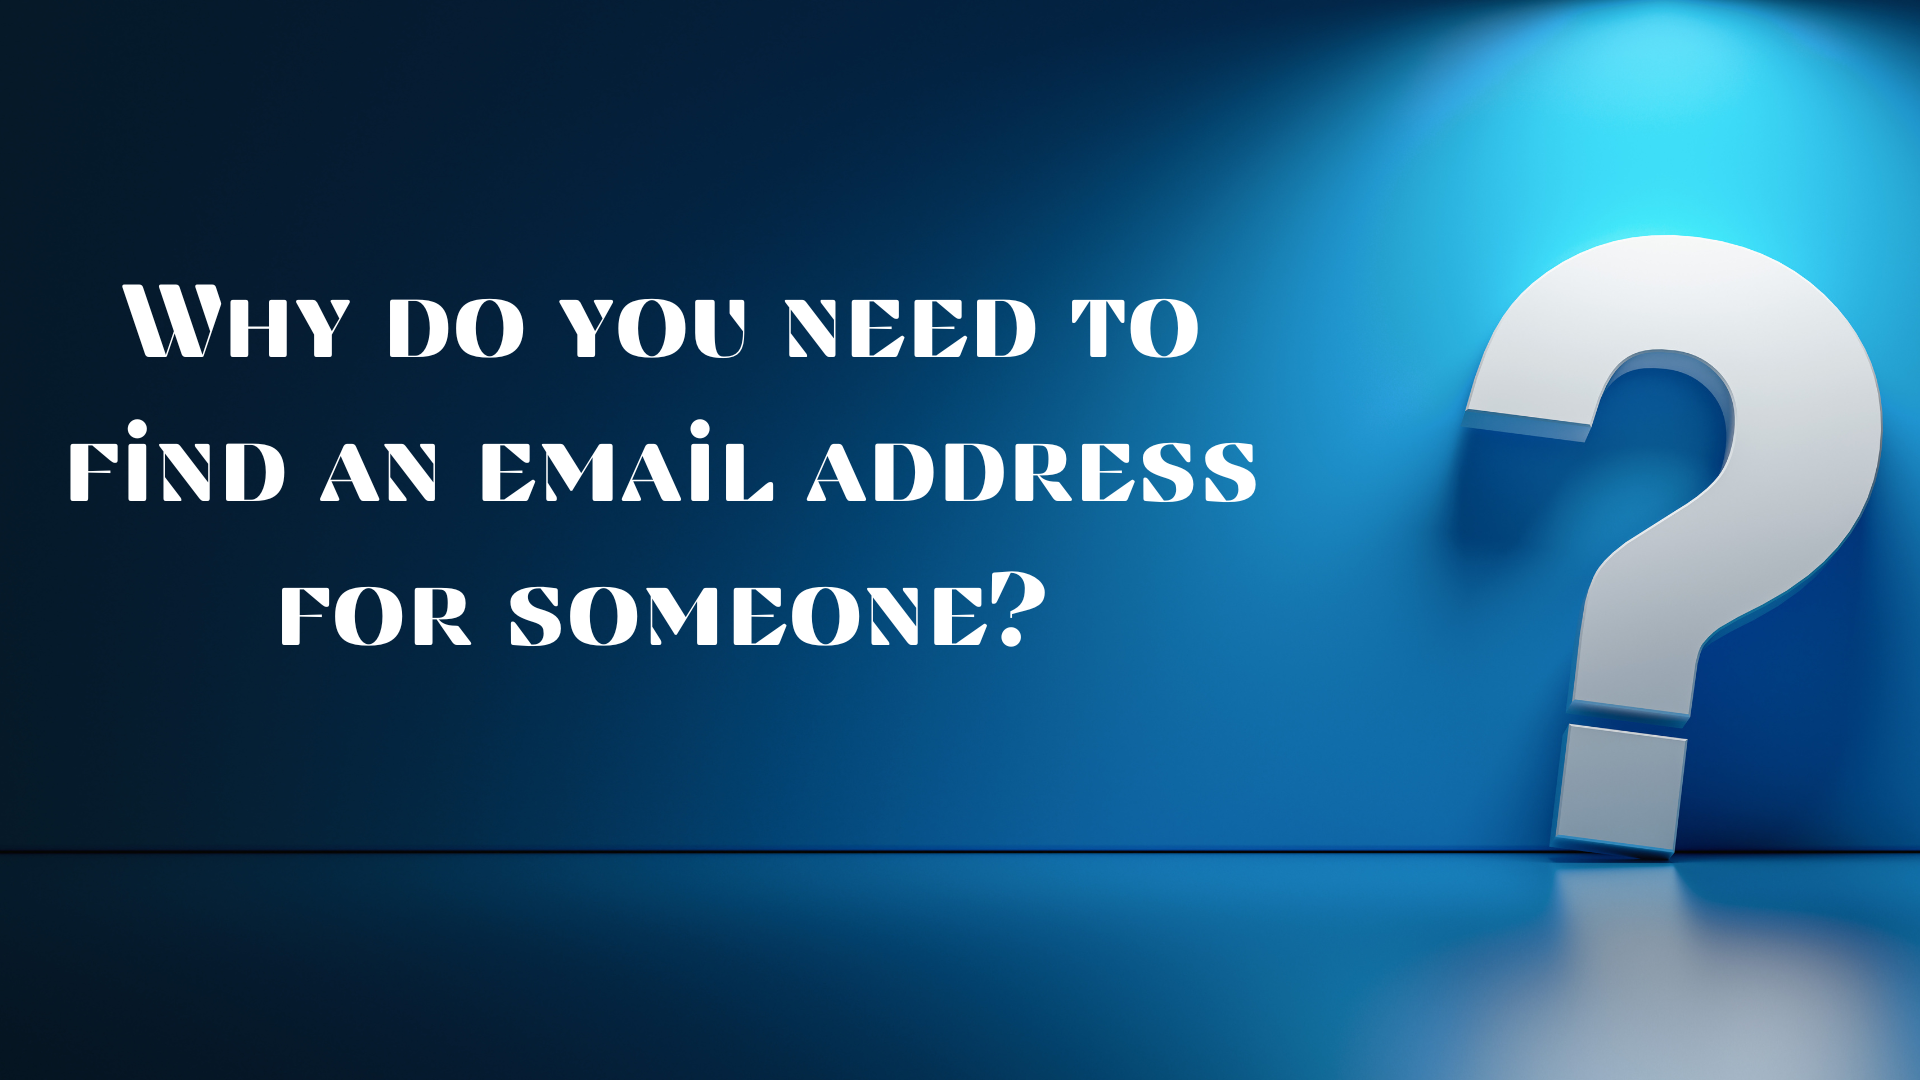 Why do you need to find an email address for someone?